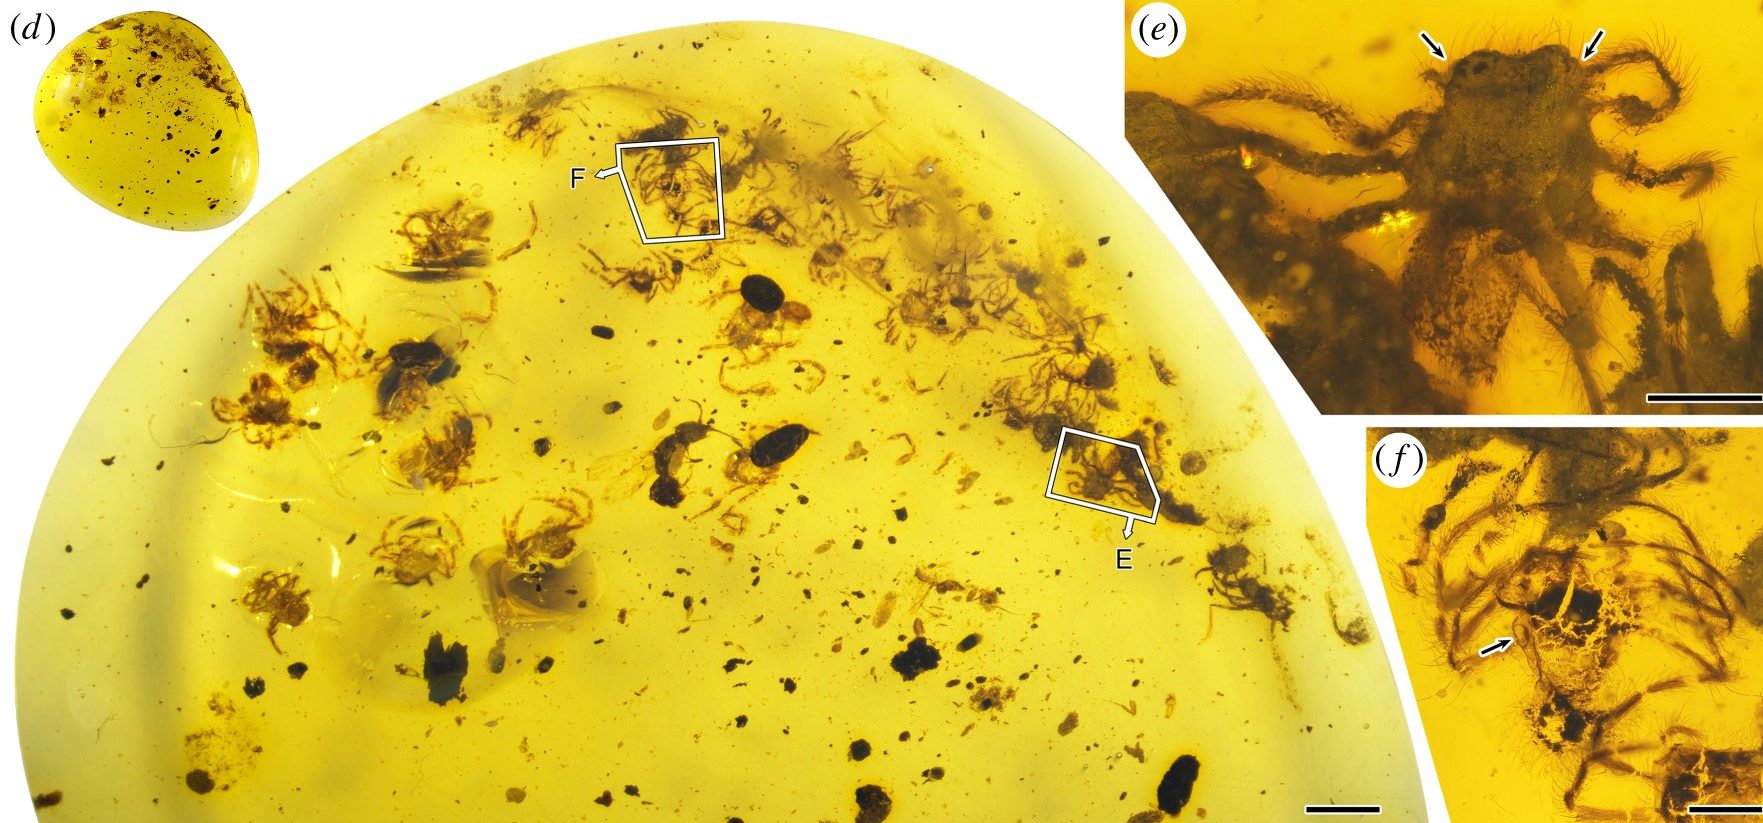 Scientists discovered the earliest evidence of spiders taking care of offspring in Burmese amber samples. Credit: Dong Ren et al. / Proceedings of the Royal Society B, 2021